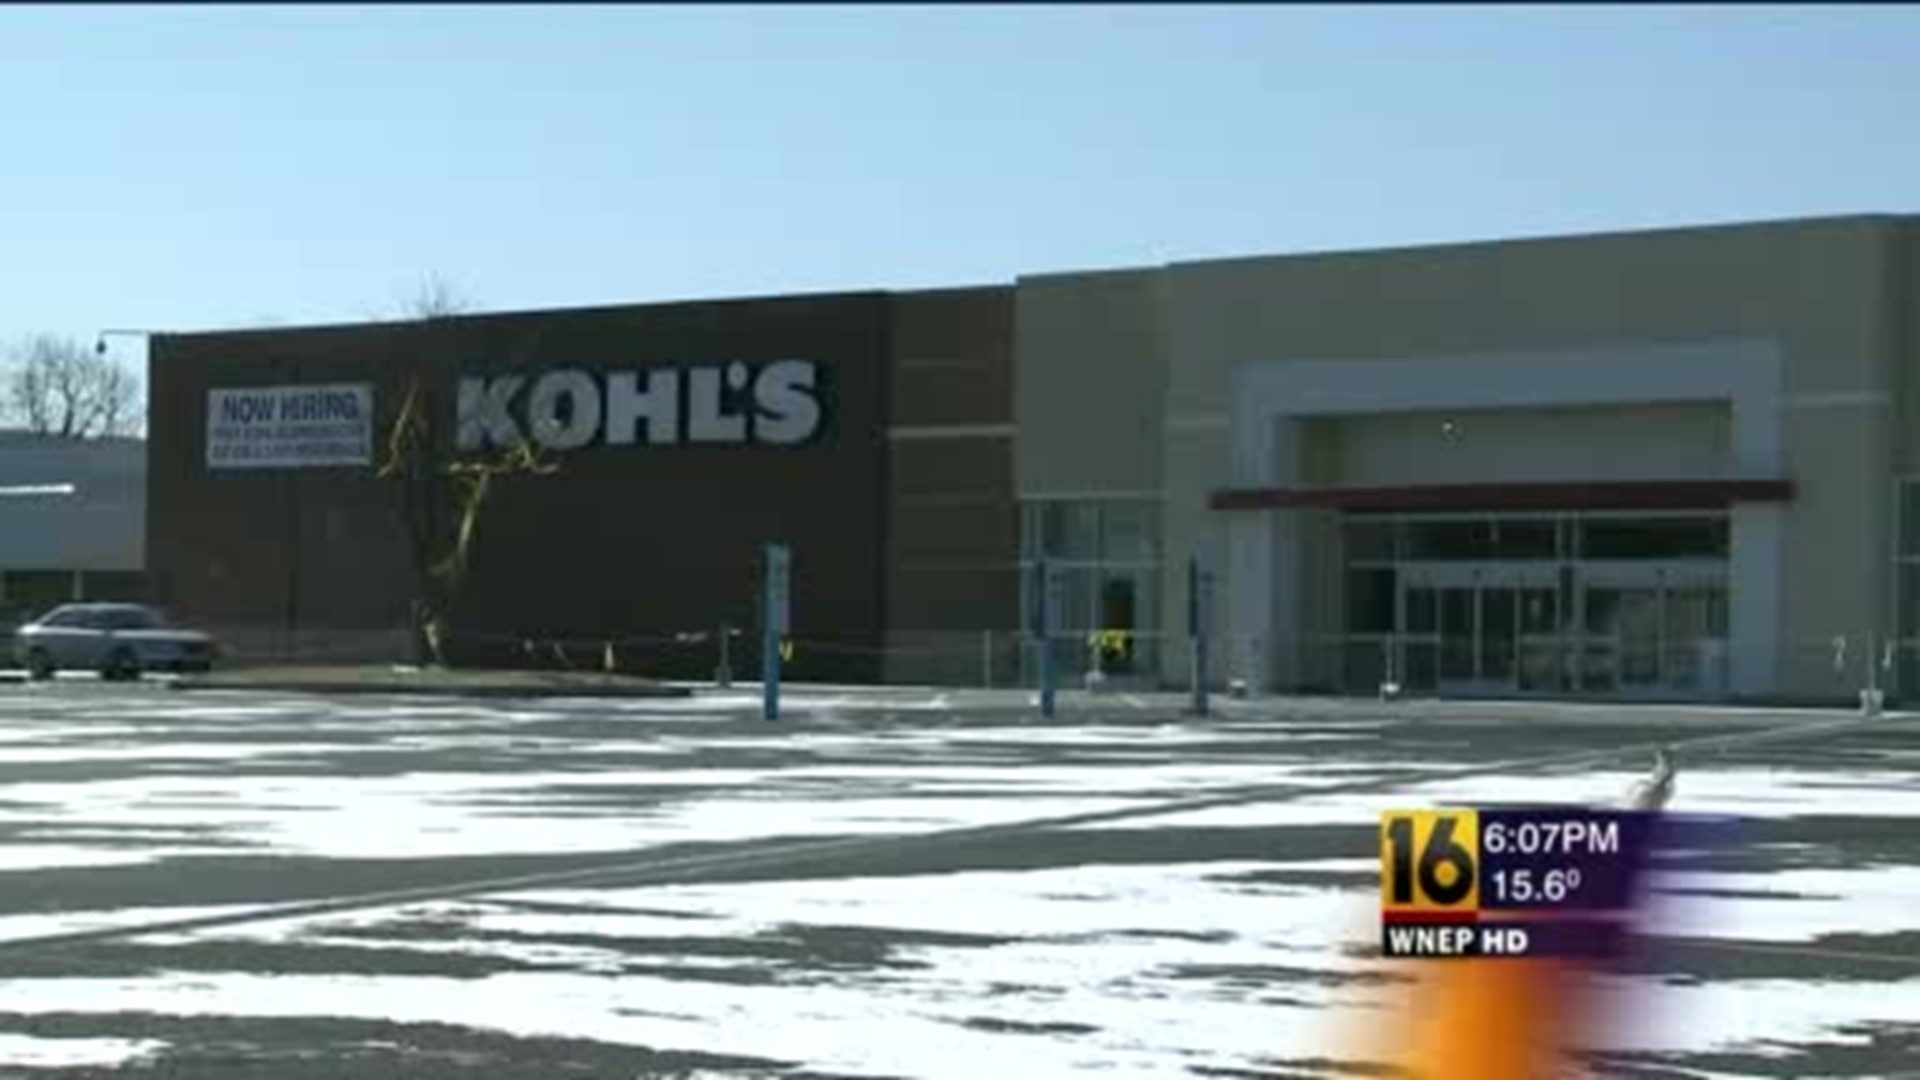 Kohl's New Store Means More Jobs